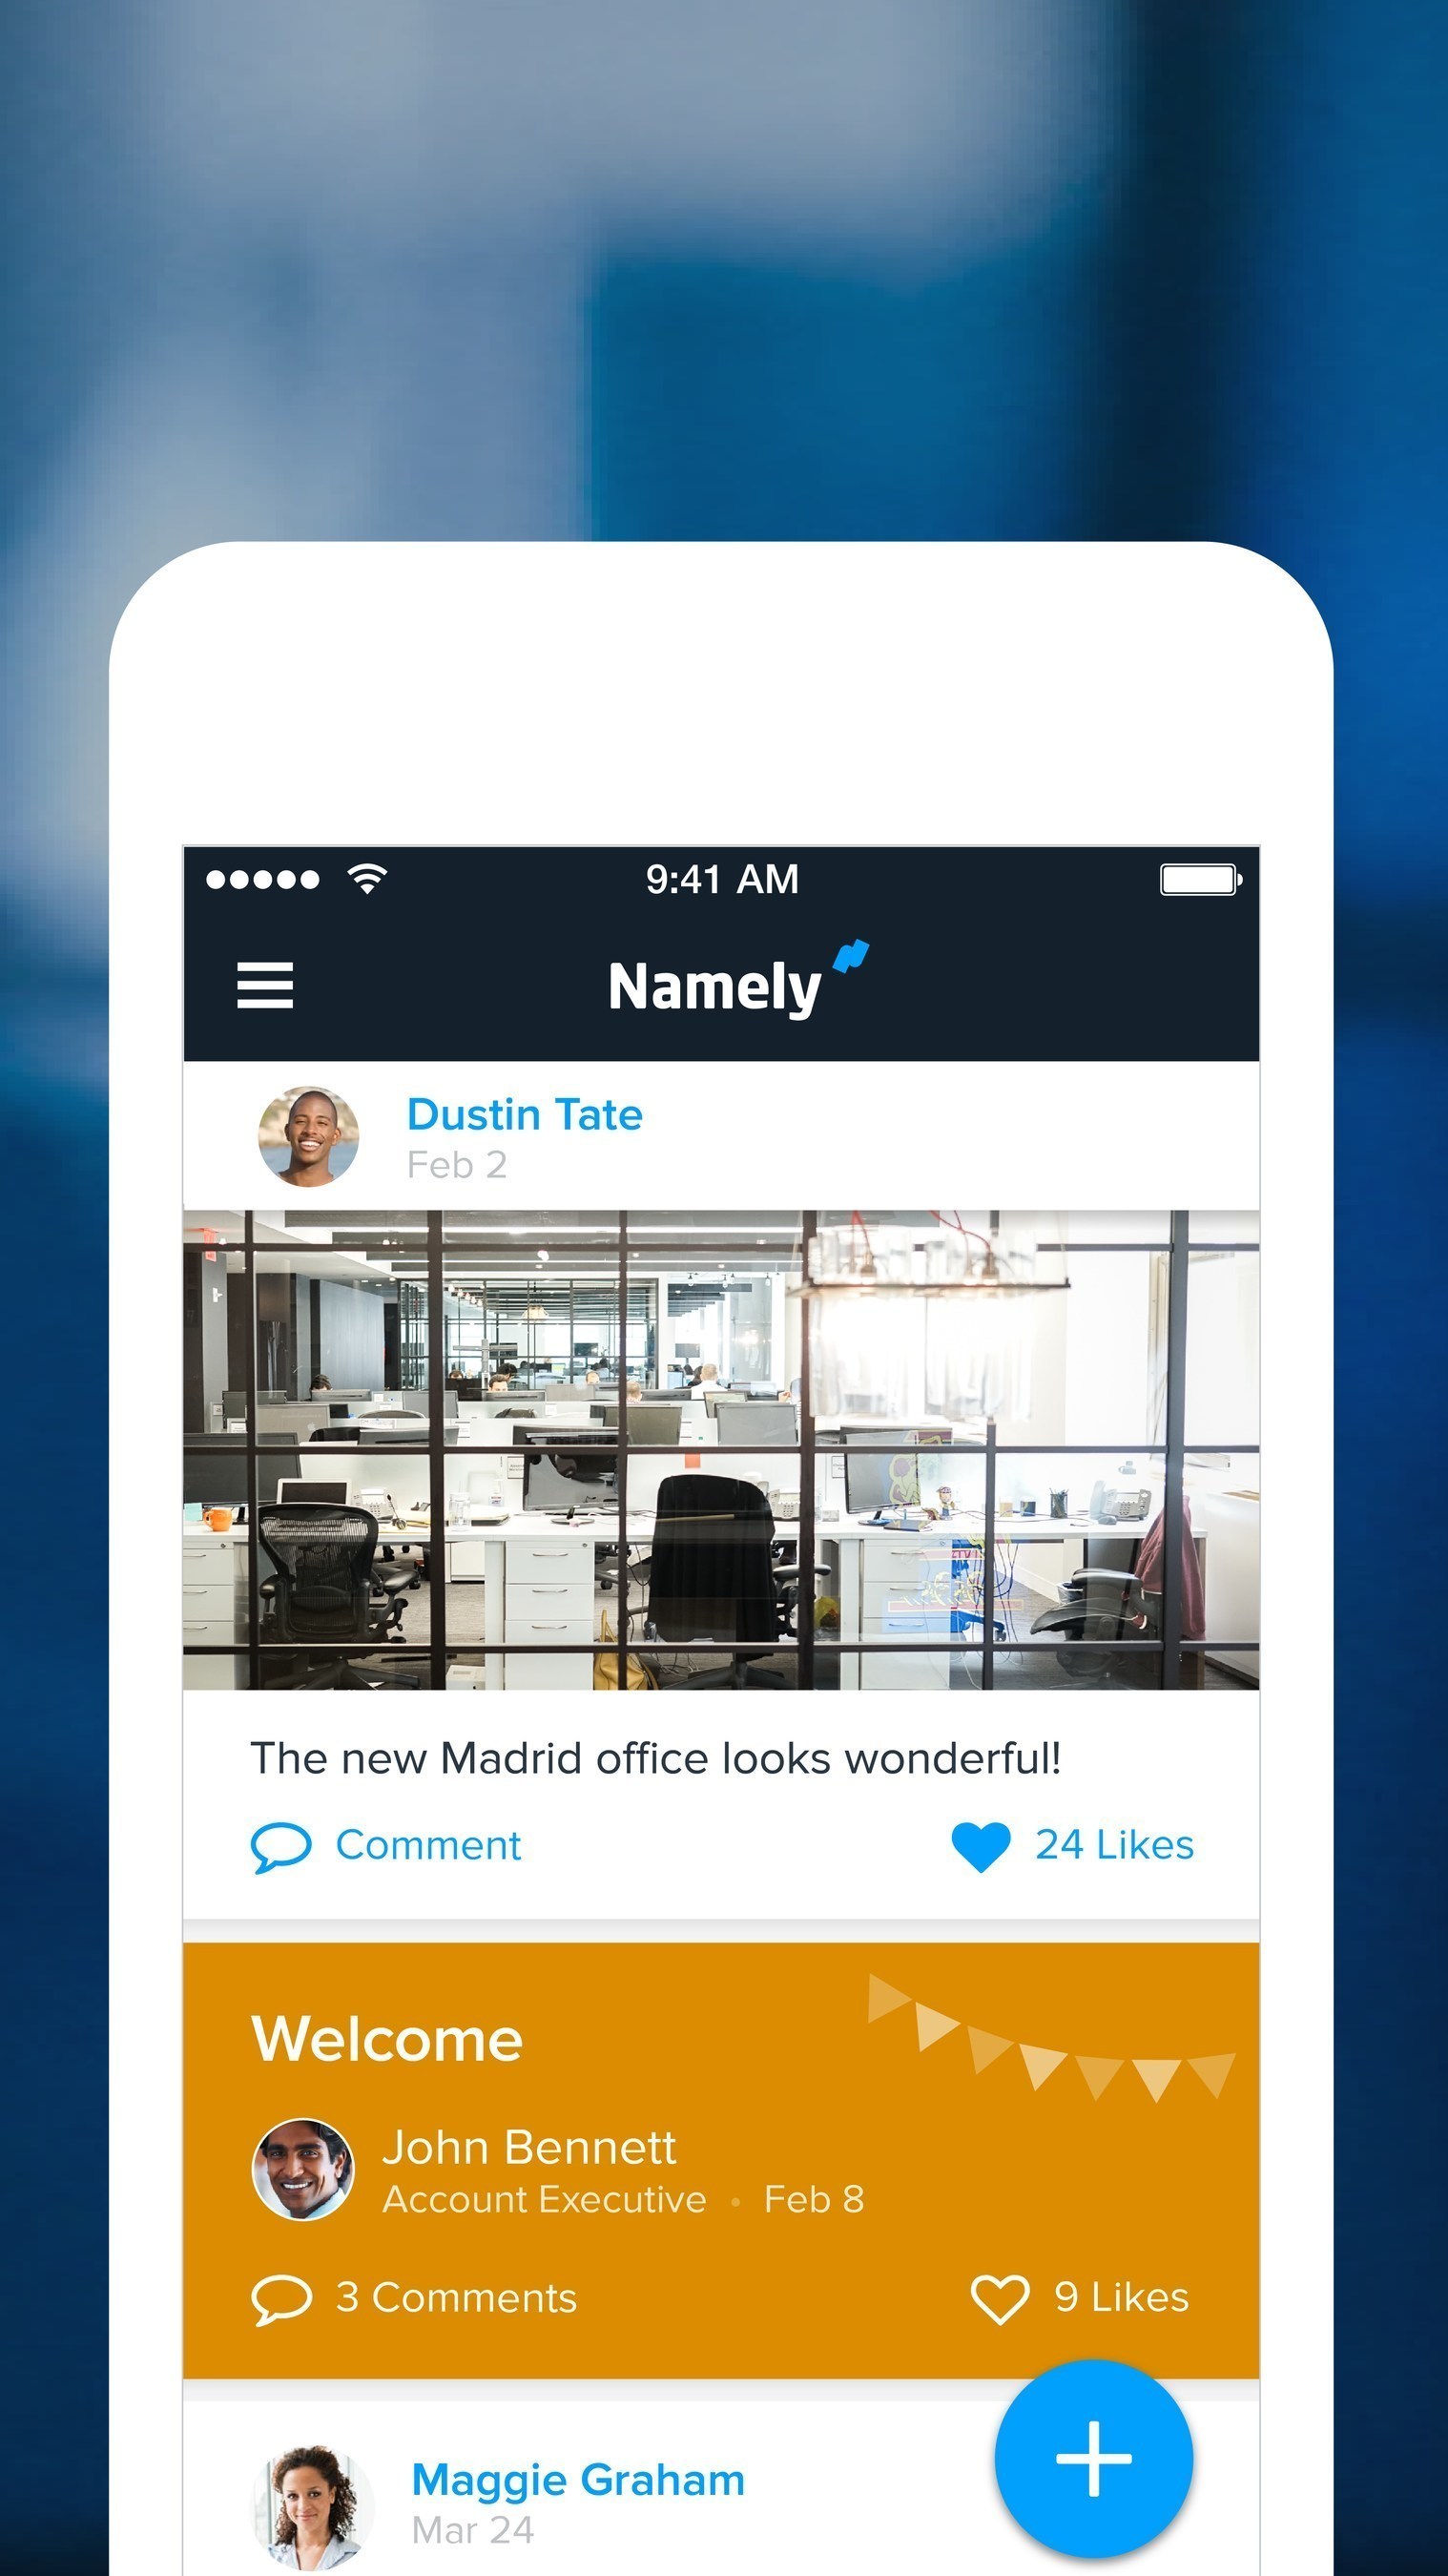 Employees can use the new mobile app for iOS to engage with their company's social news feed on Namely.